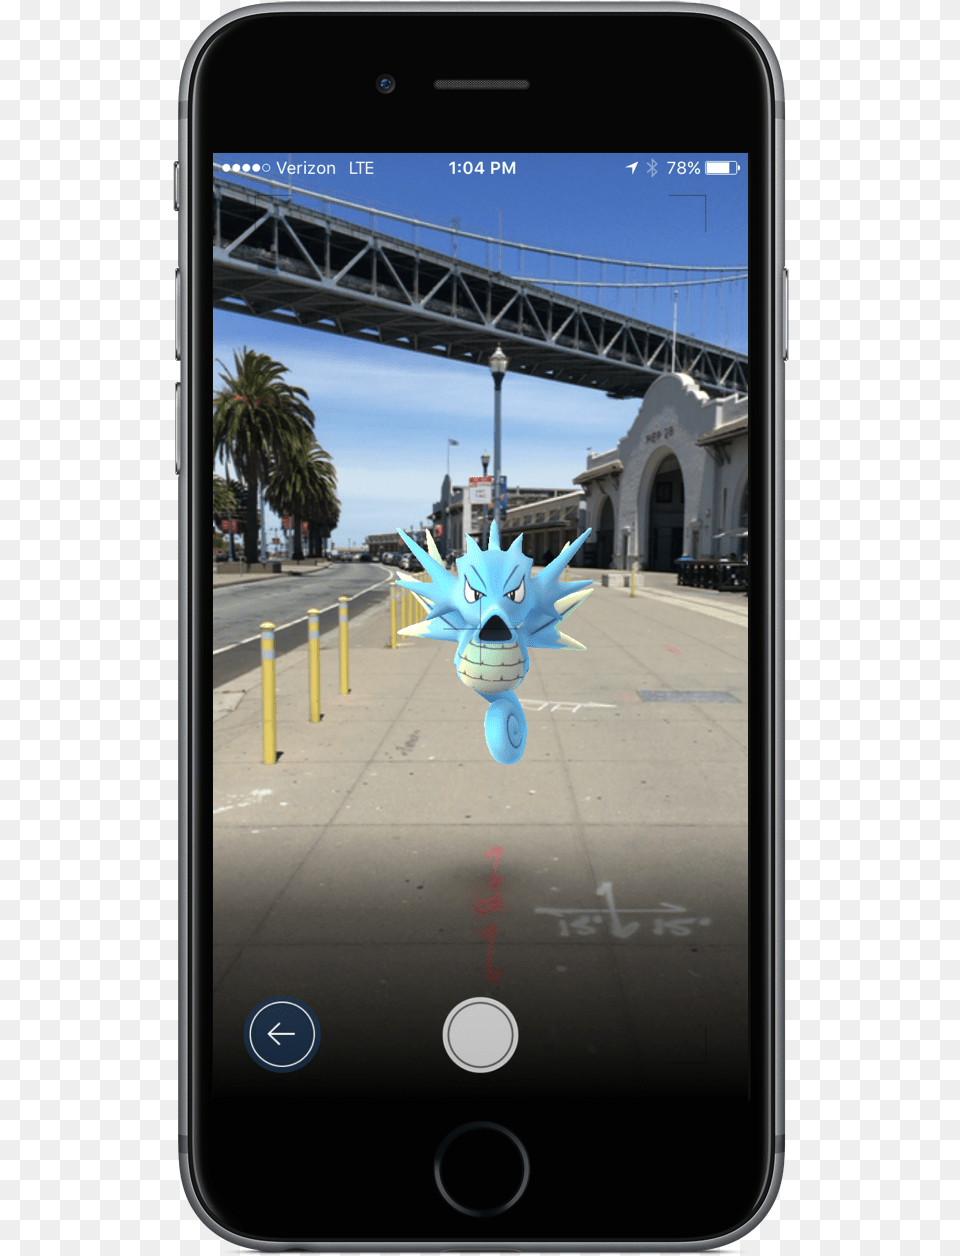 Pokemon Go New Update Apk, Electronics, Phone, Road, Mobile Phone Png